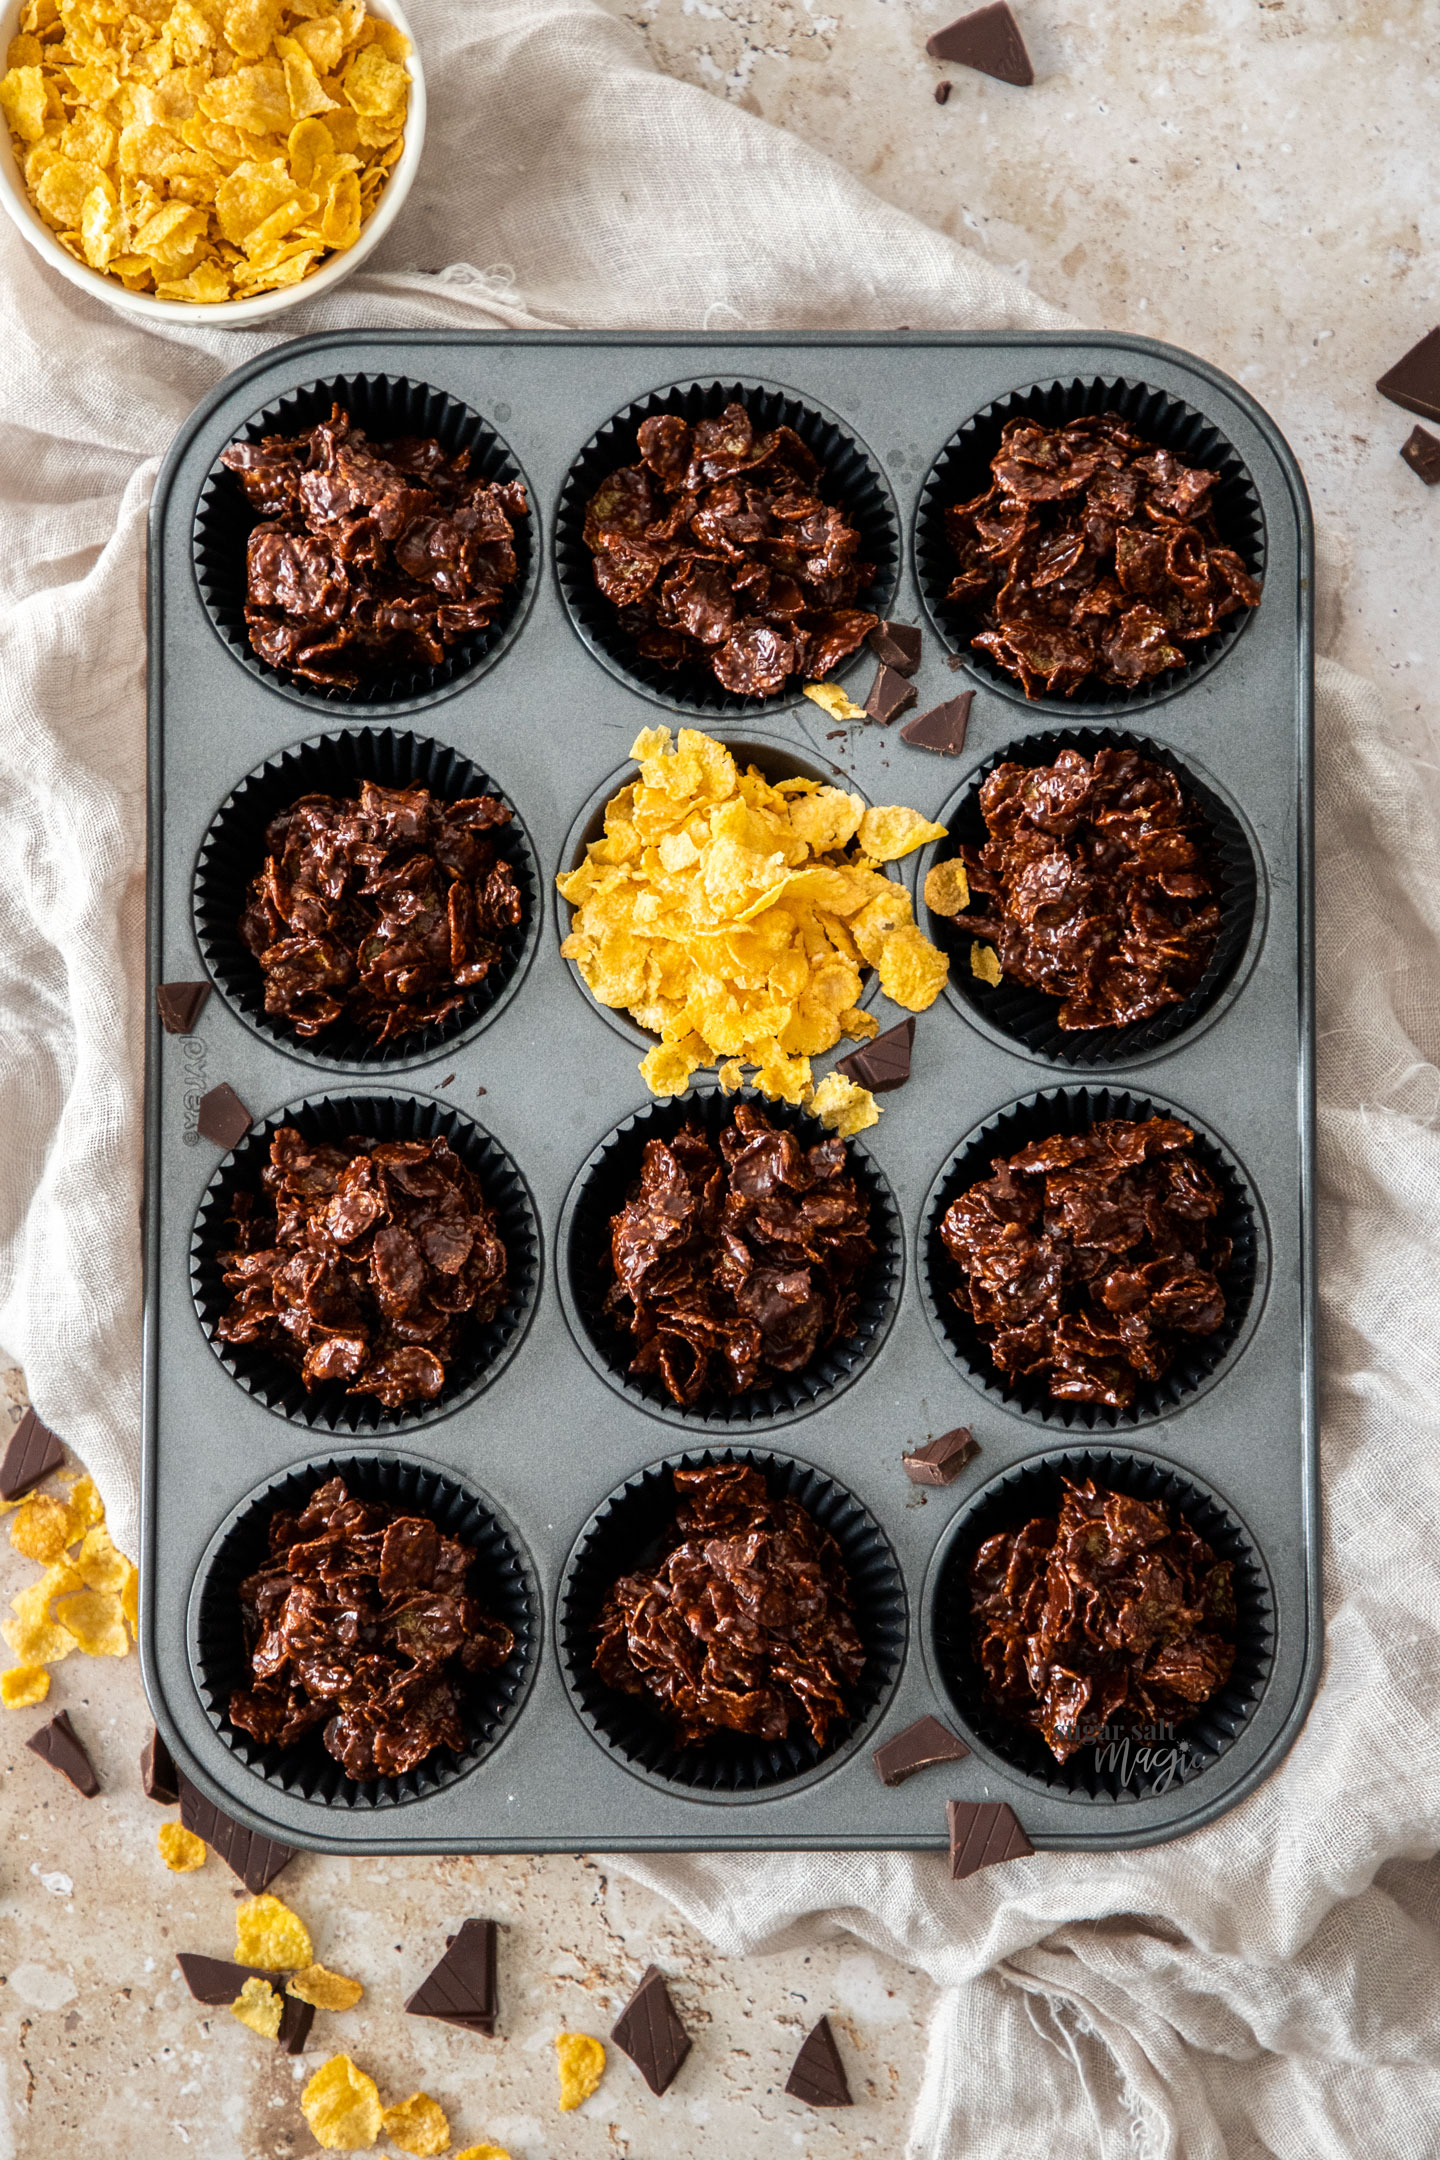 11 chocolate cornflake cakes in a muffin tray.